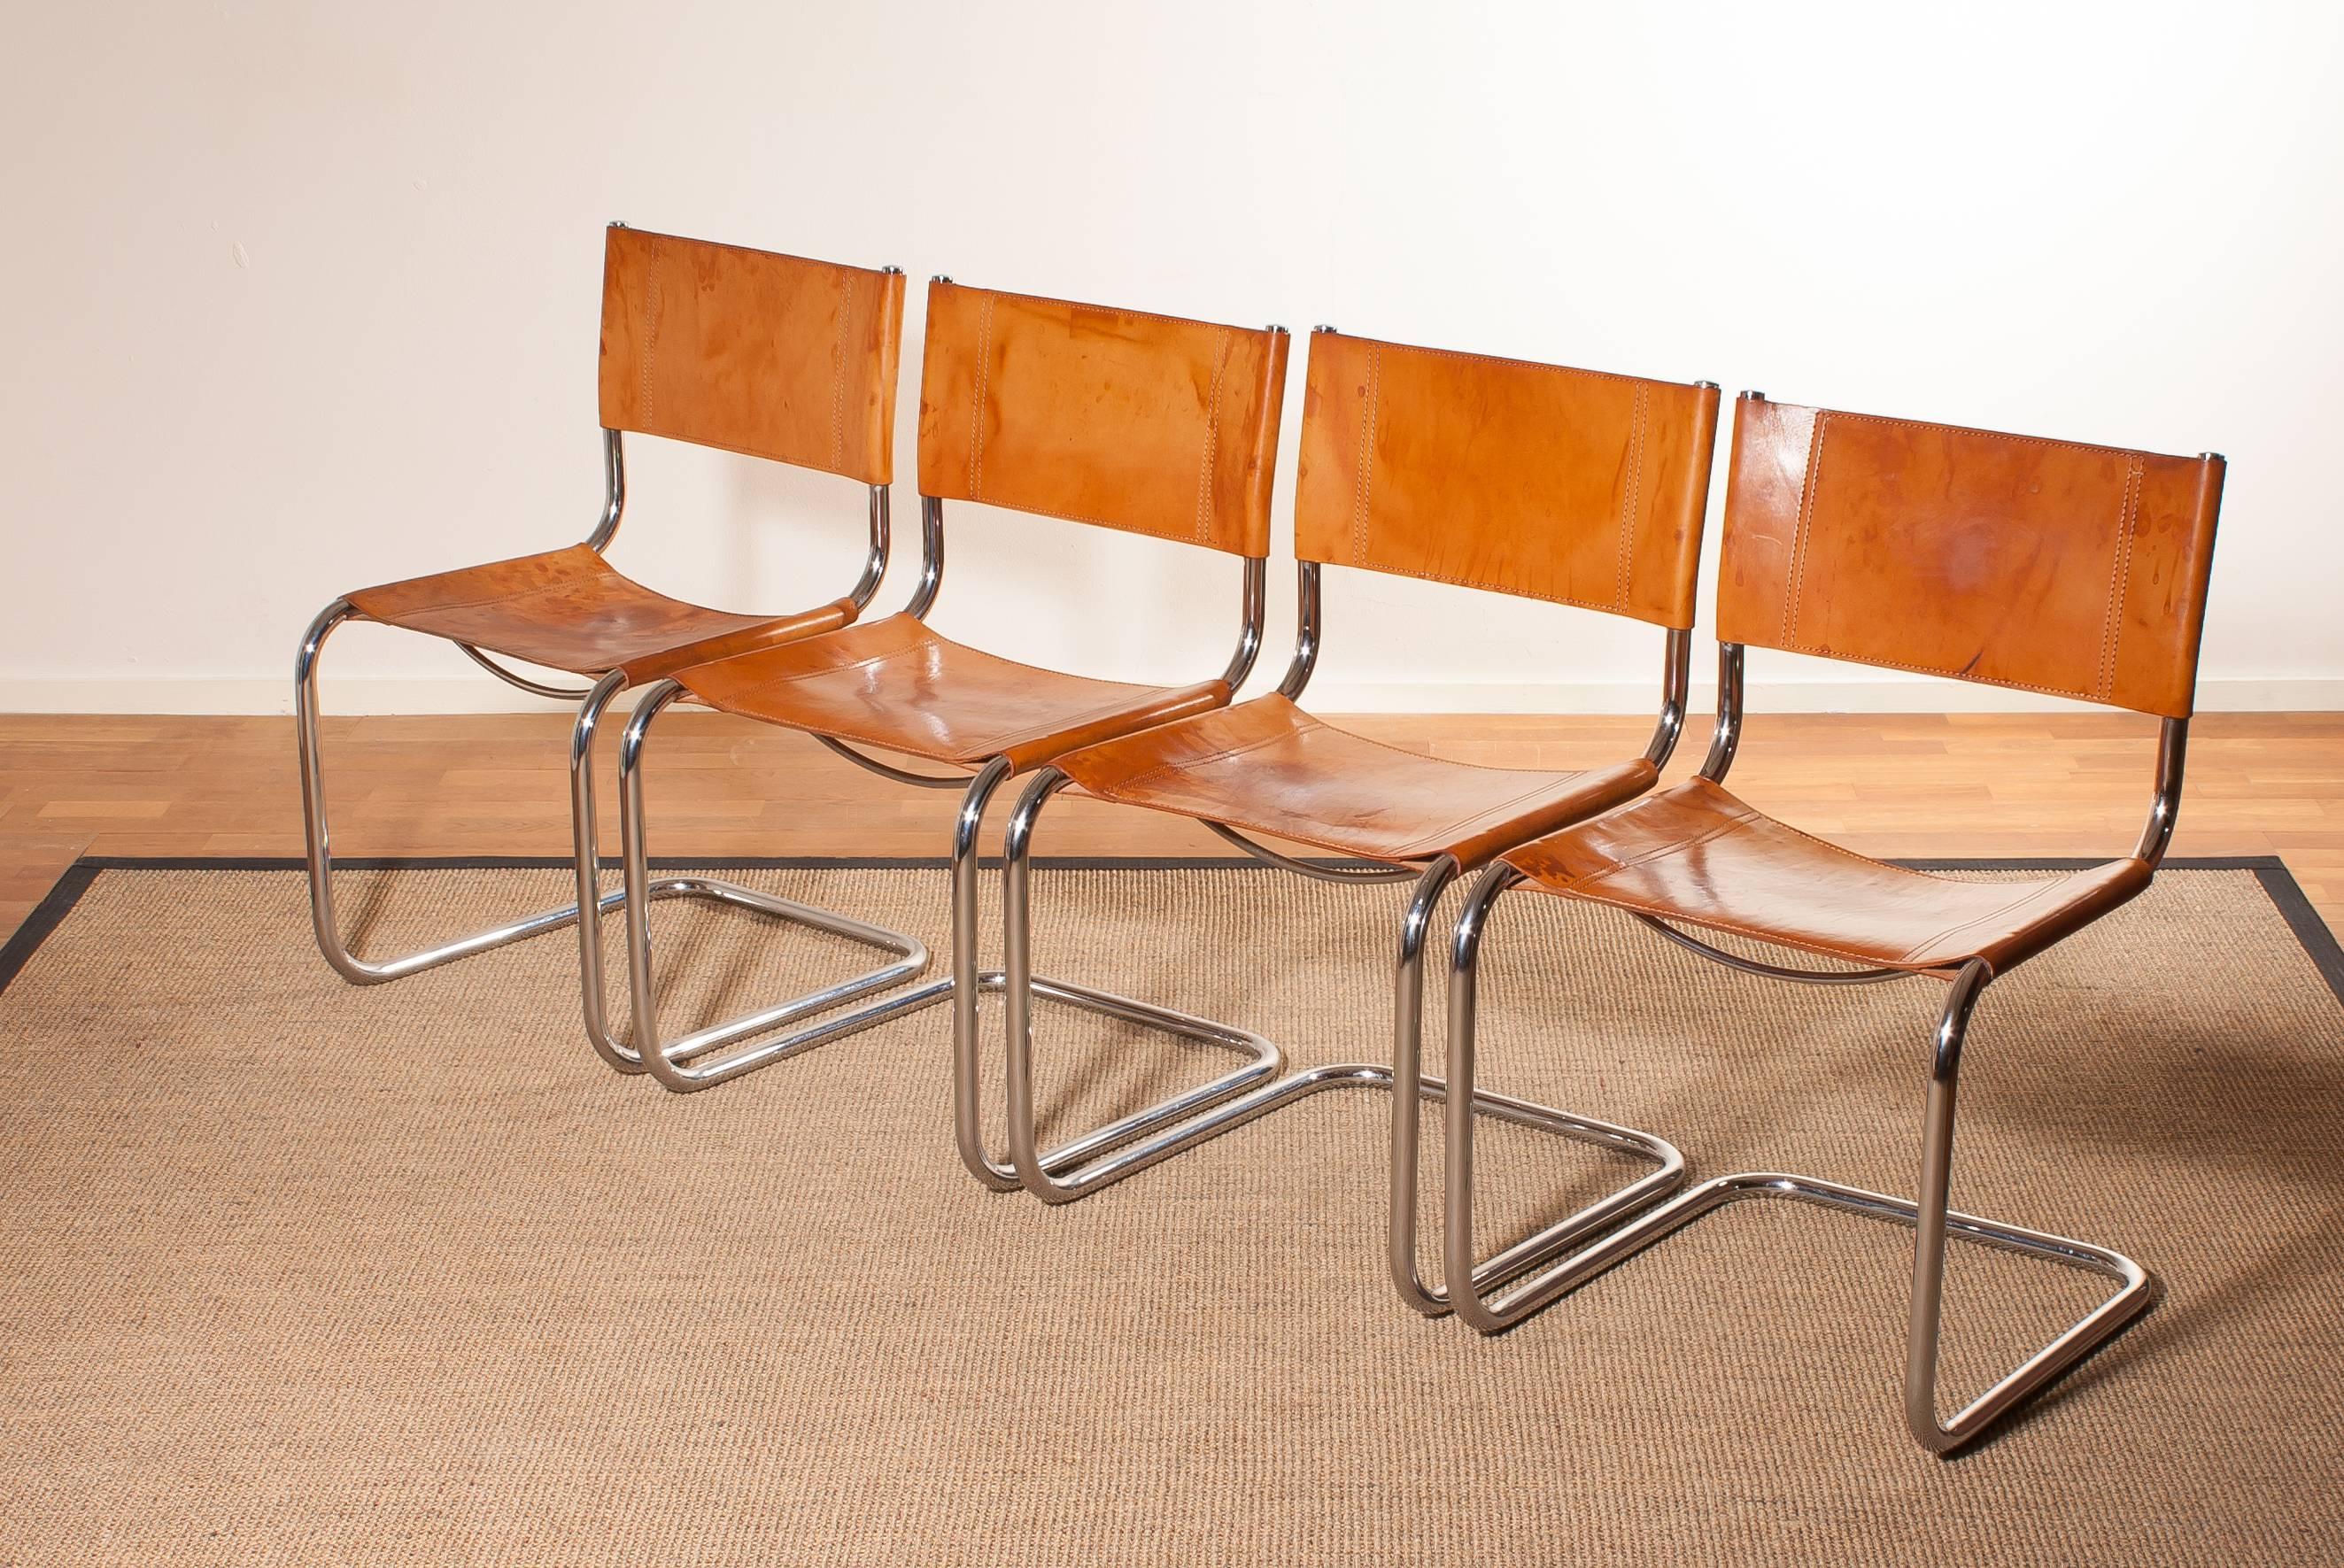 A beautiful set of four dining chairs designed by Mart Stam for Fasem.
These chairs have a cantilevered tubular metal frame with cognac saddle leather seating and backrest.
They are in a wonderful condition.
Period 1970s
Dimensions : H.82 cm ,